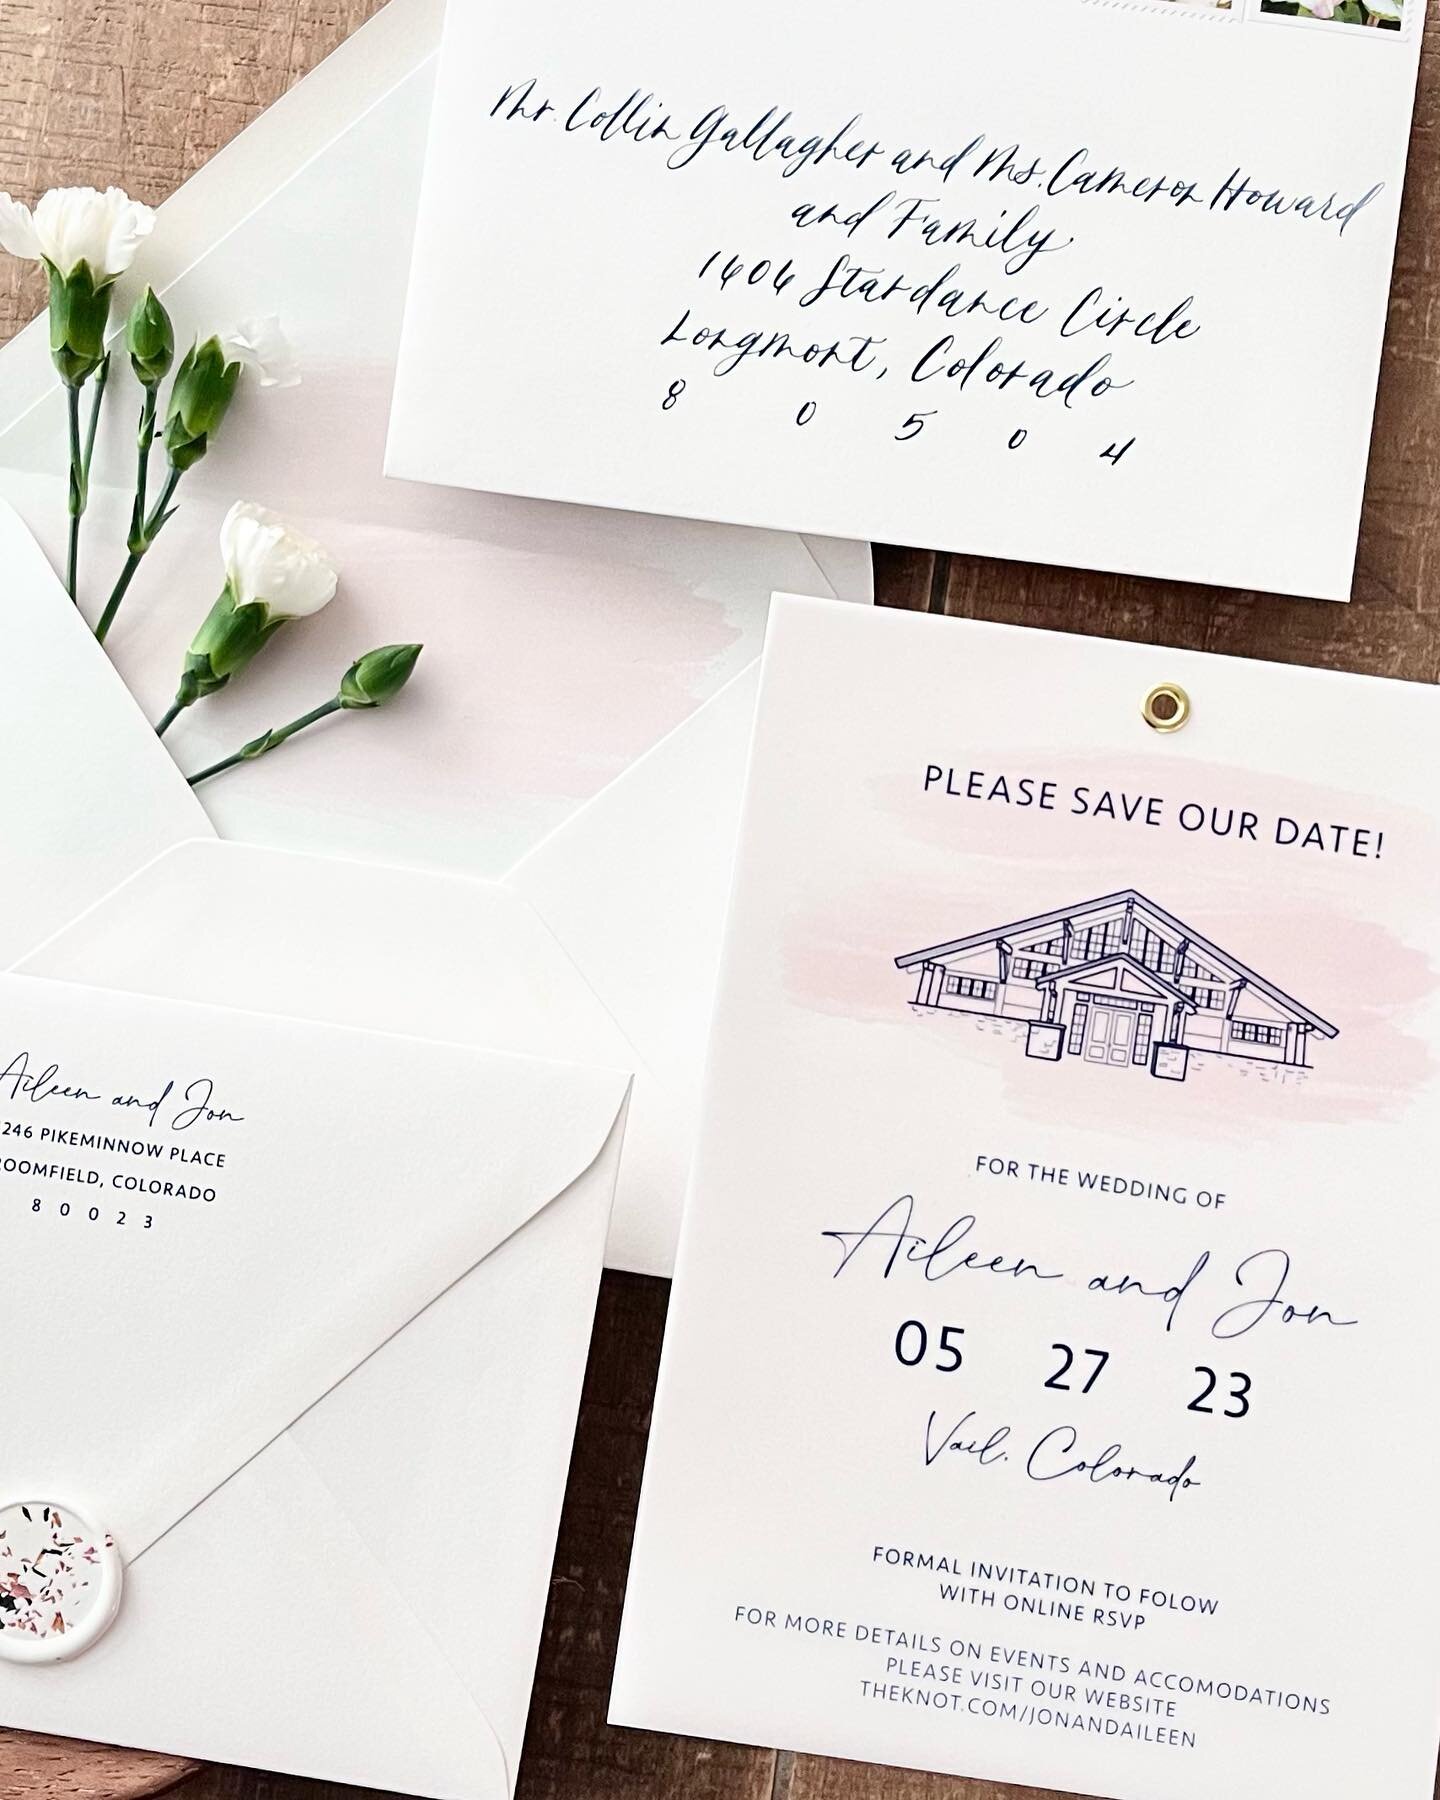 Some warm and bright save the dates on a cloudy mountain day